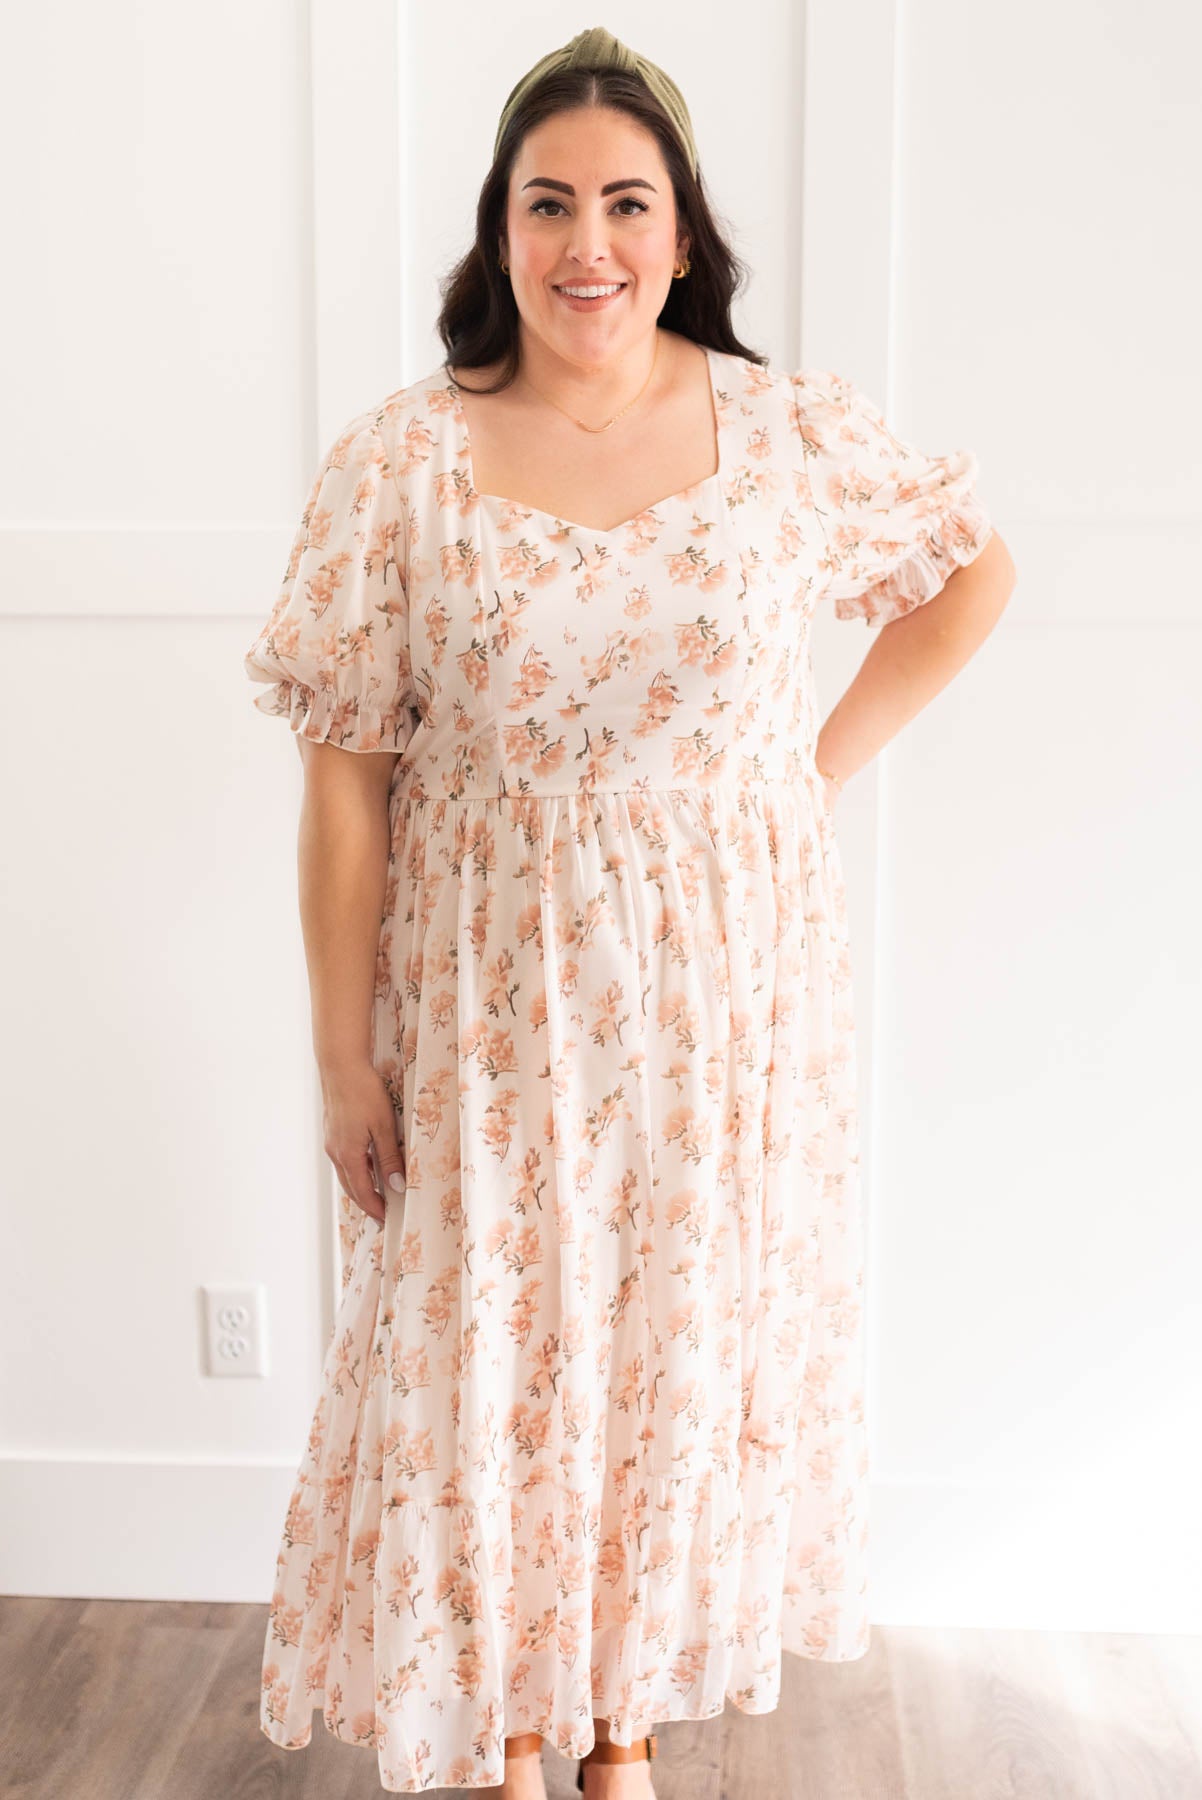 Plus size cream floral dress with sweetheart neckline